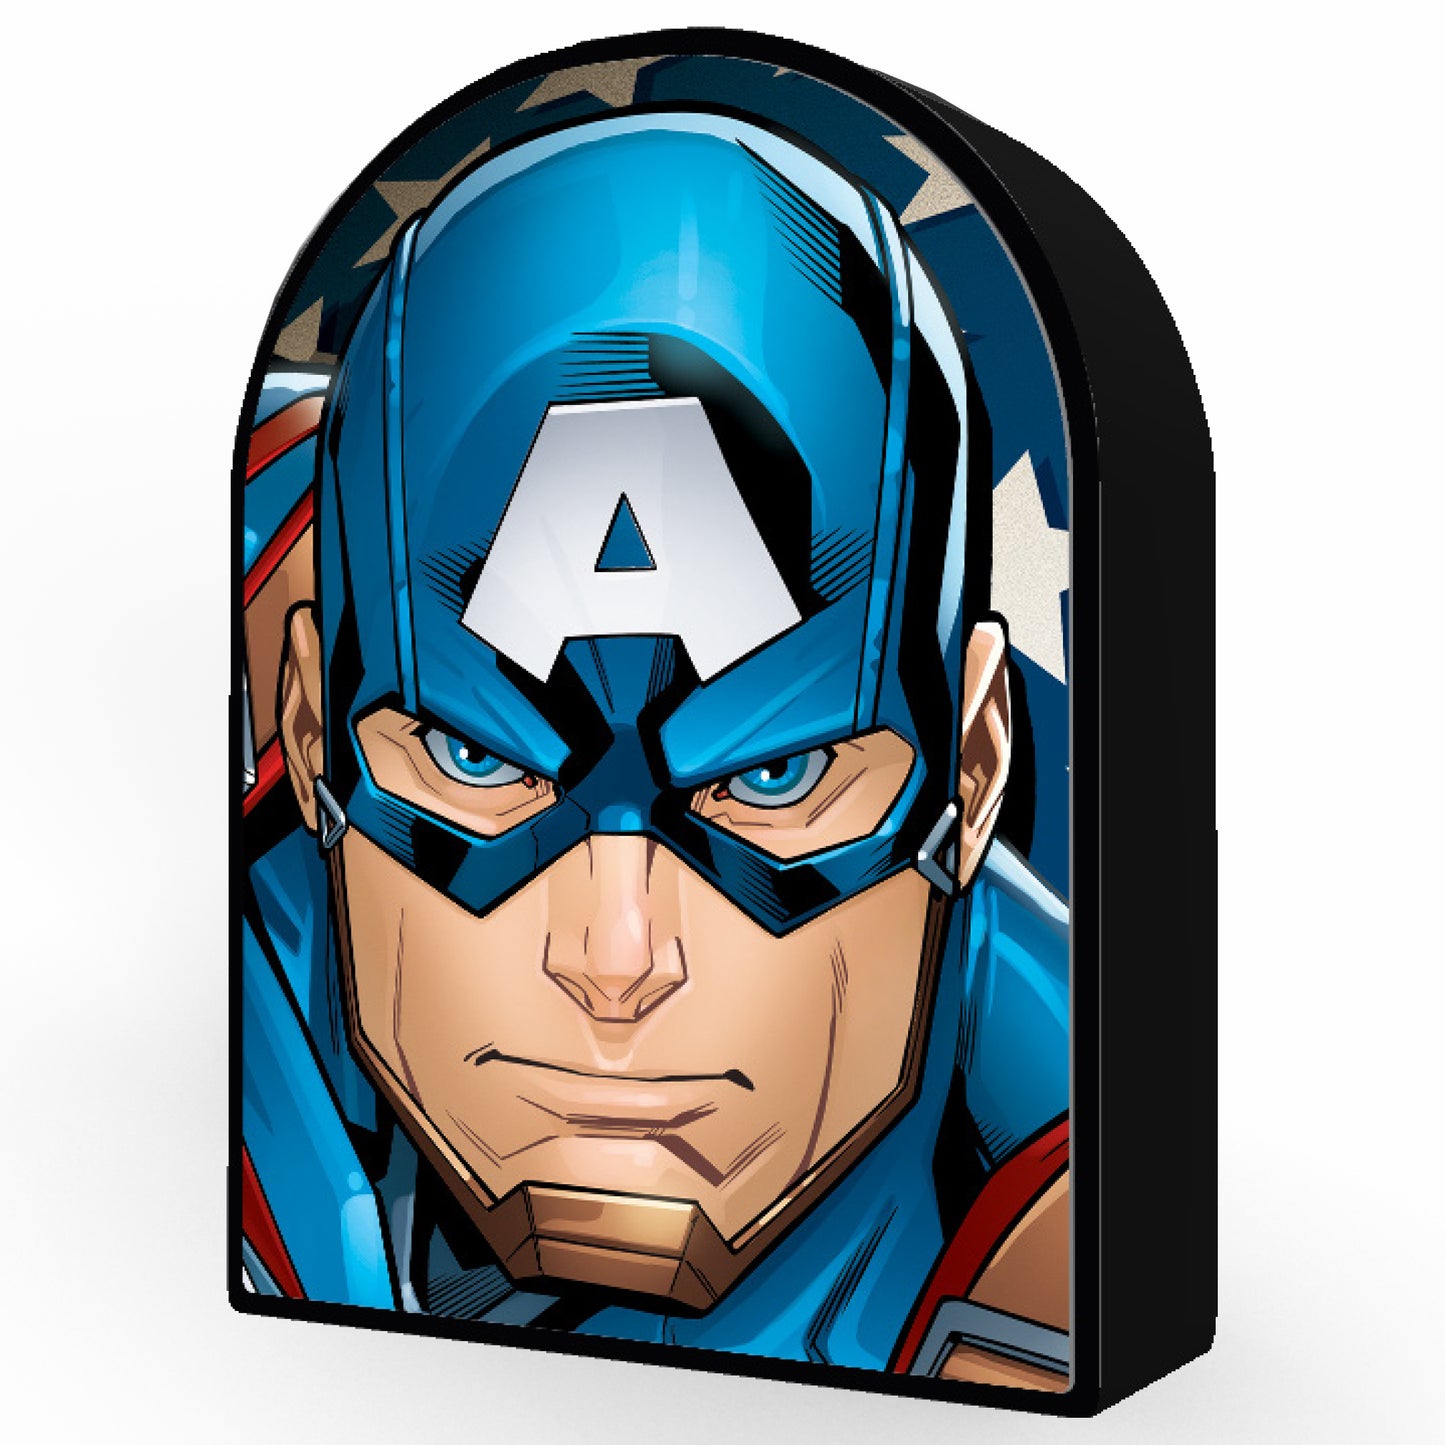 Captain America Marvel 3D Jigsaw Puzzle in Tin Box Packaging 35584 300pc 12x18"